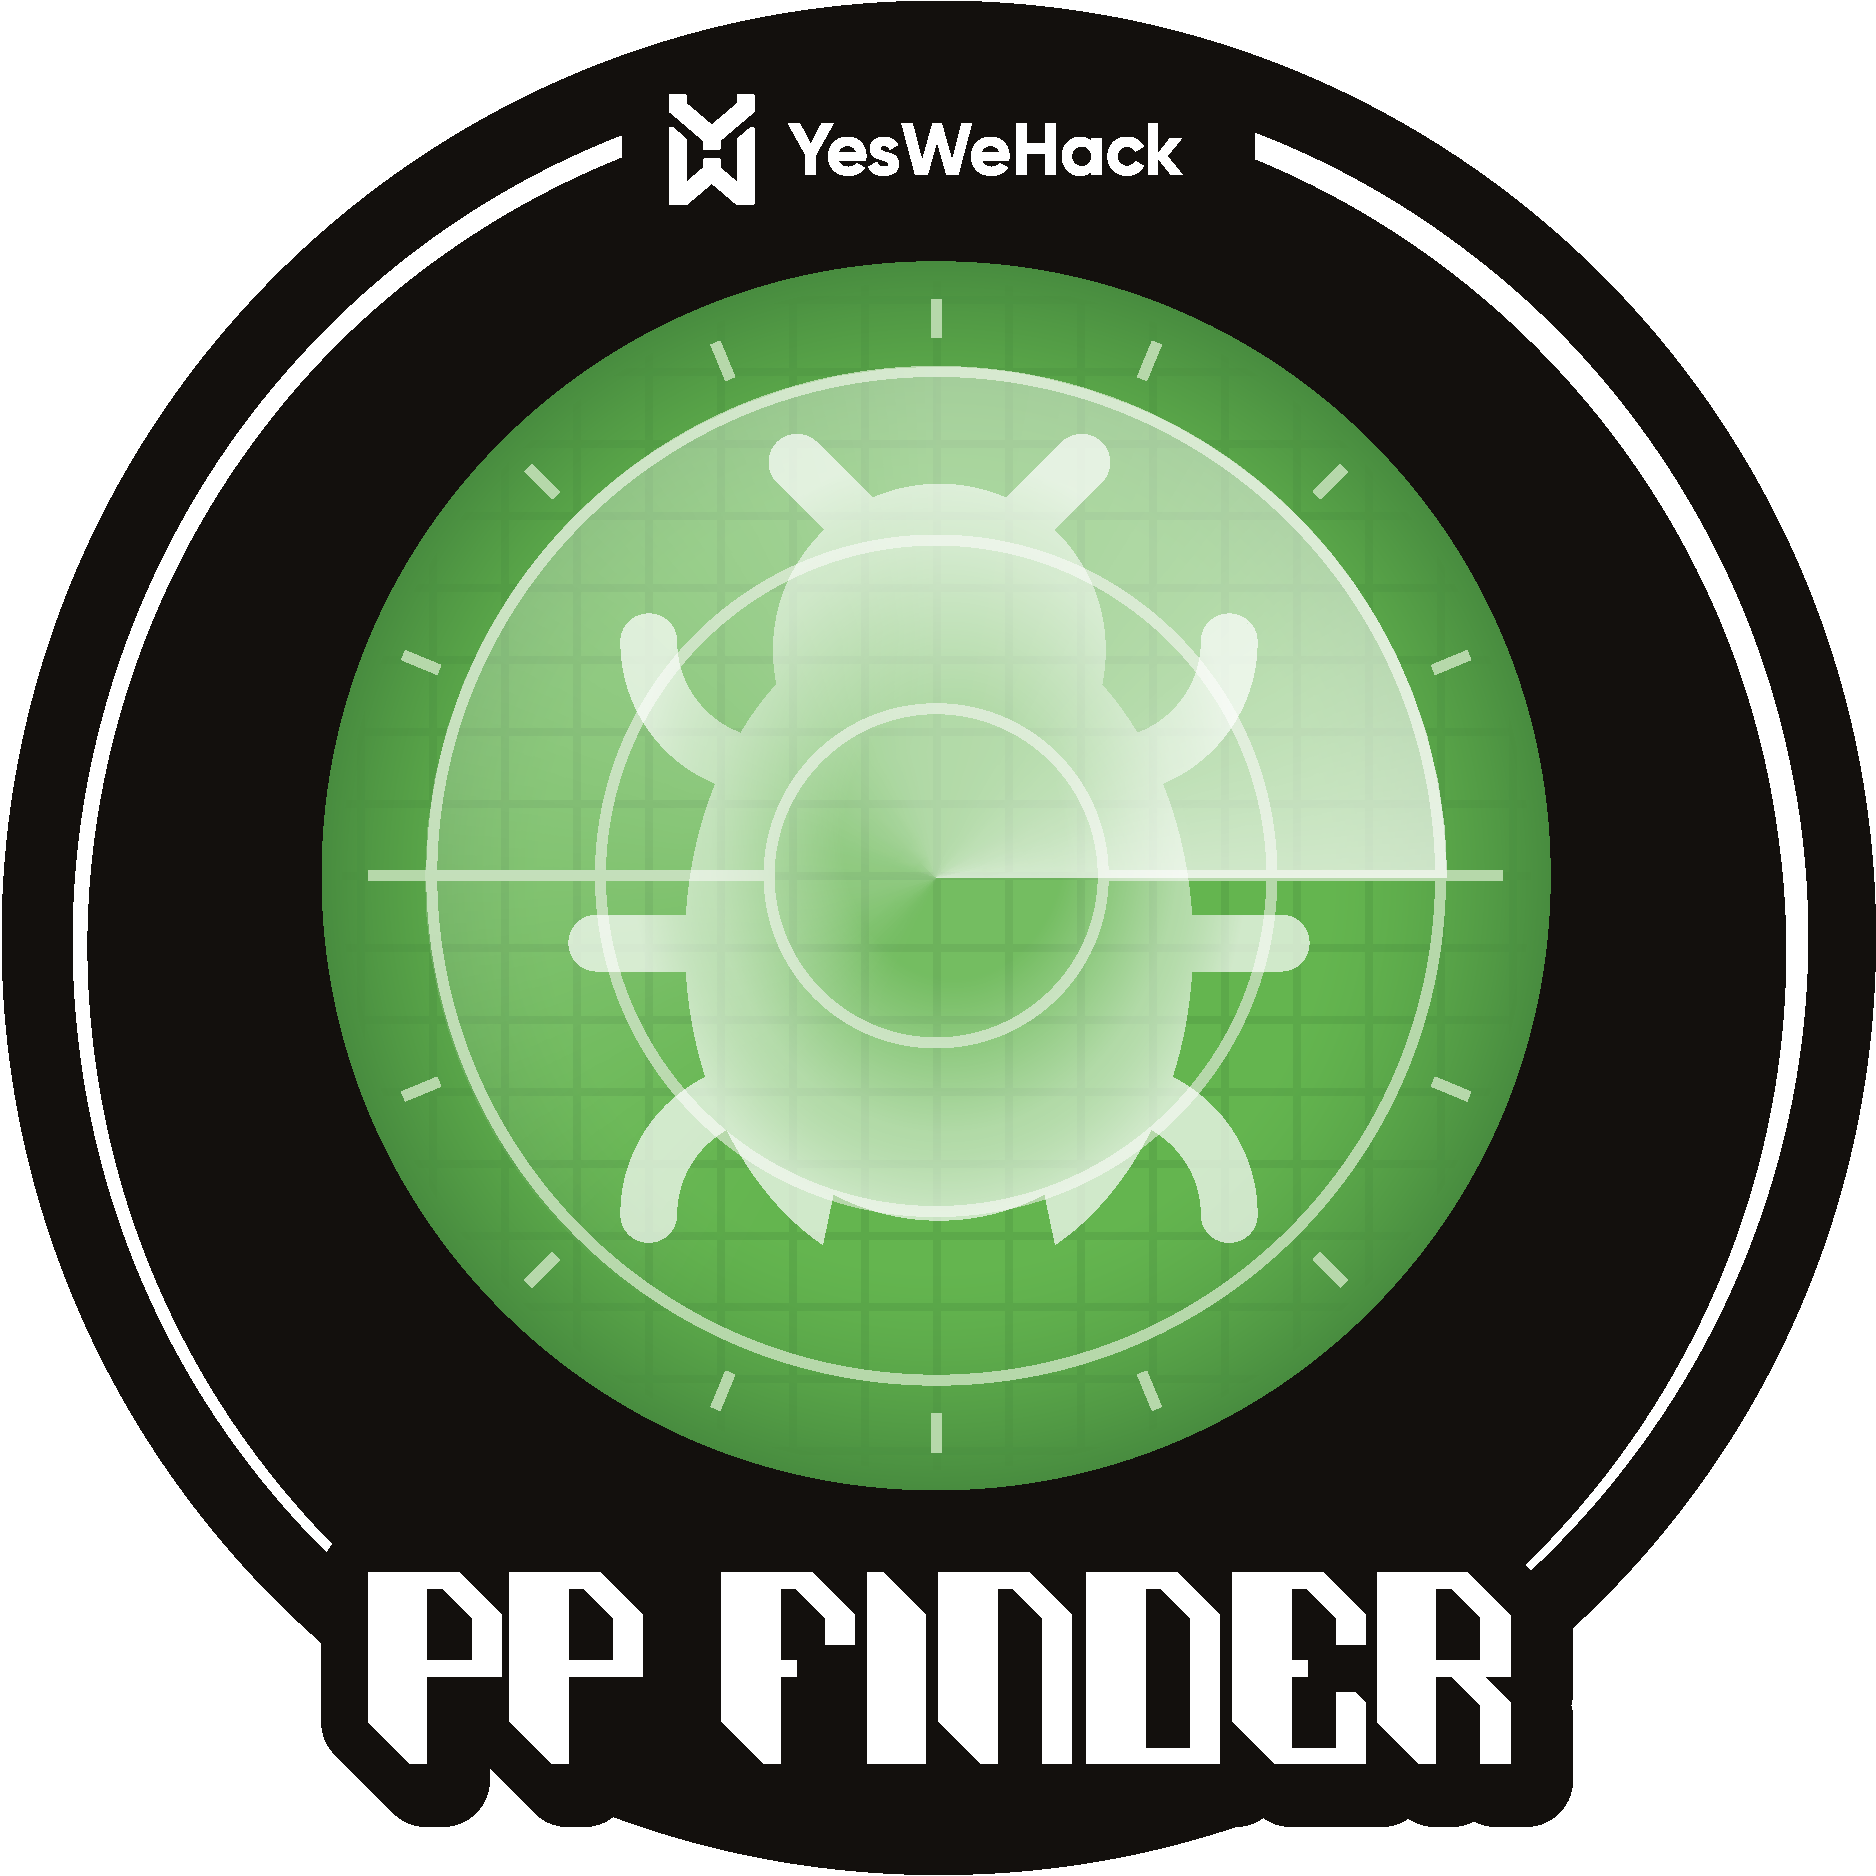 PP finder tool by YesWeHack 